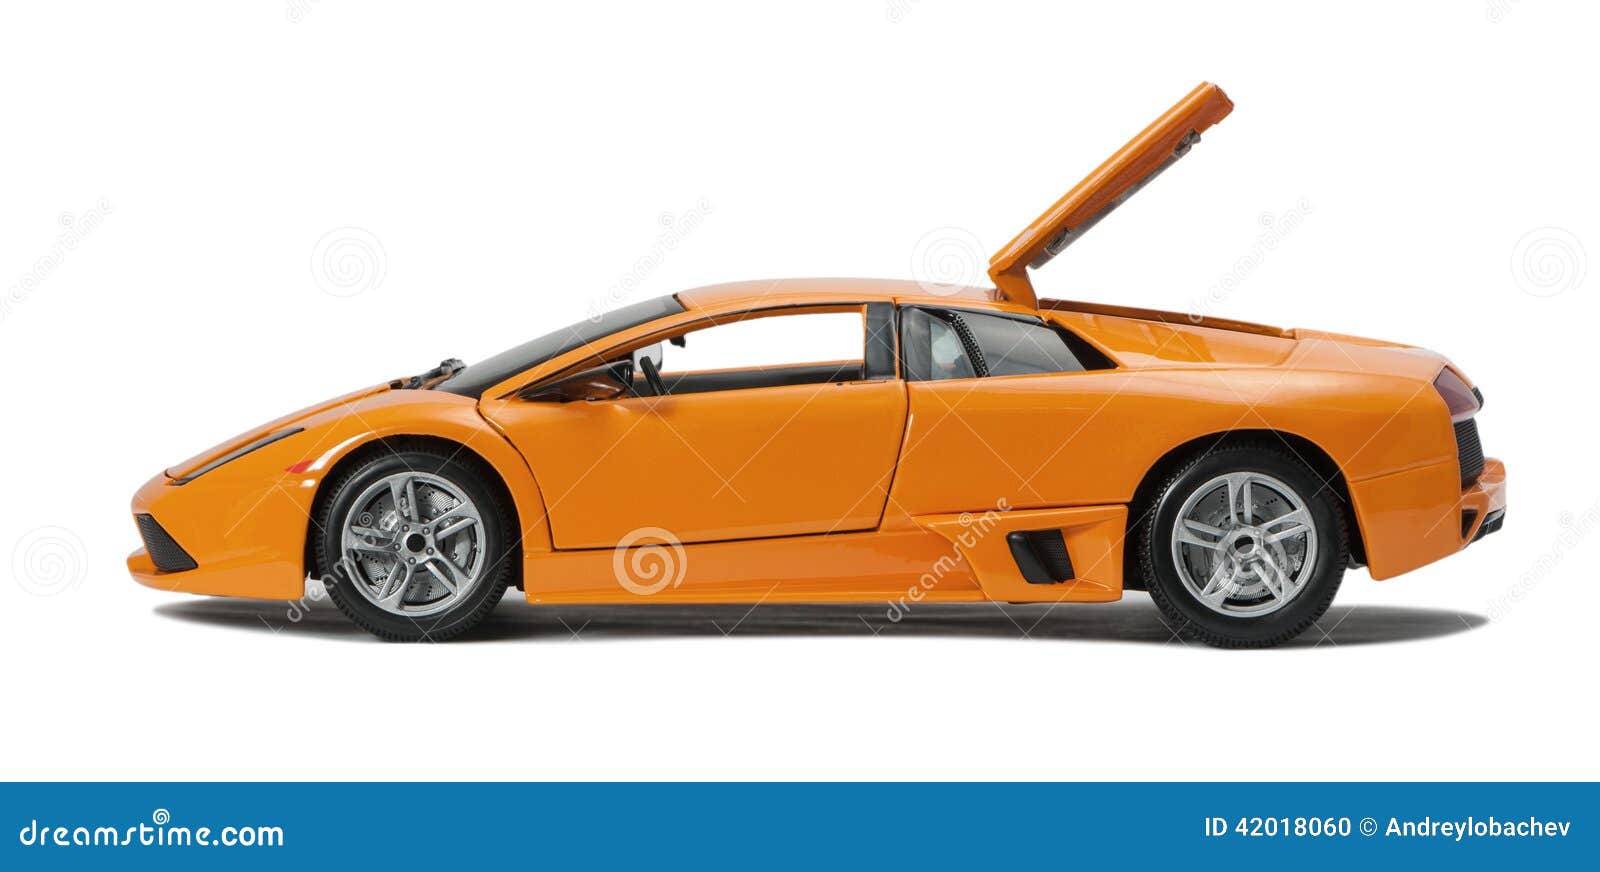 collectible toy sport car model